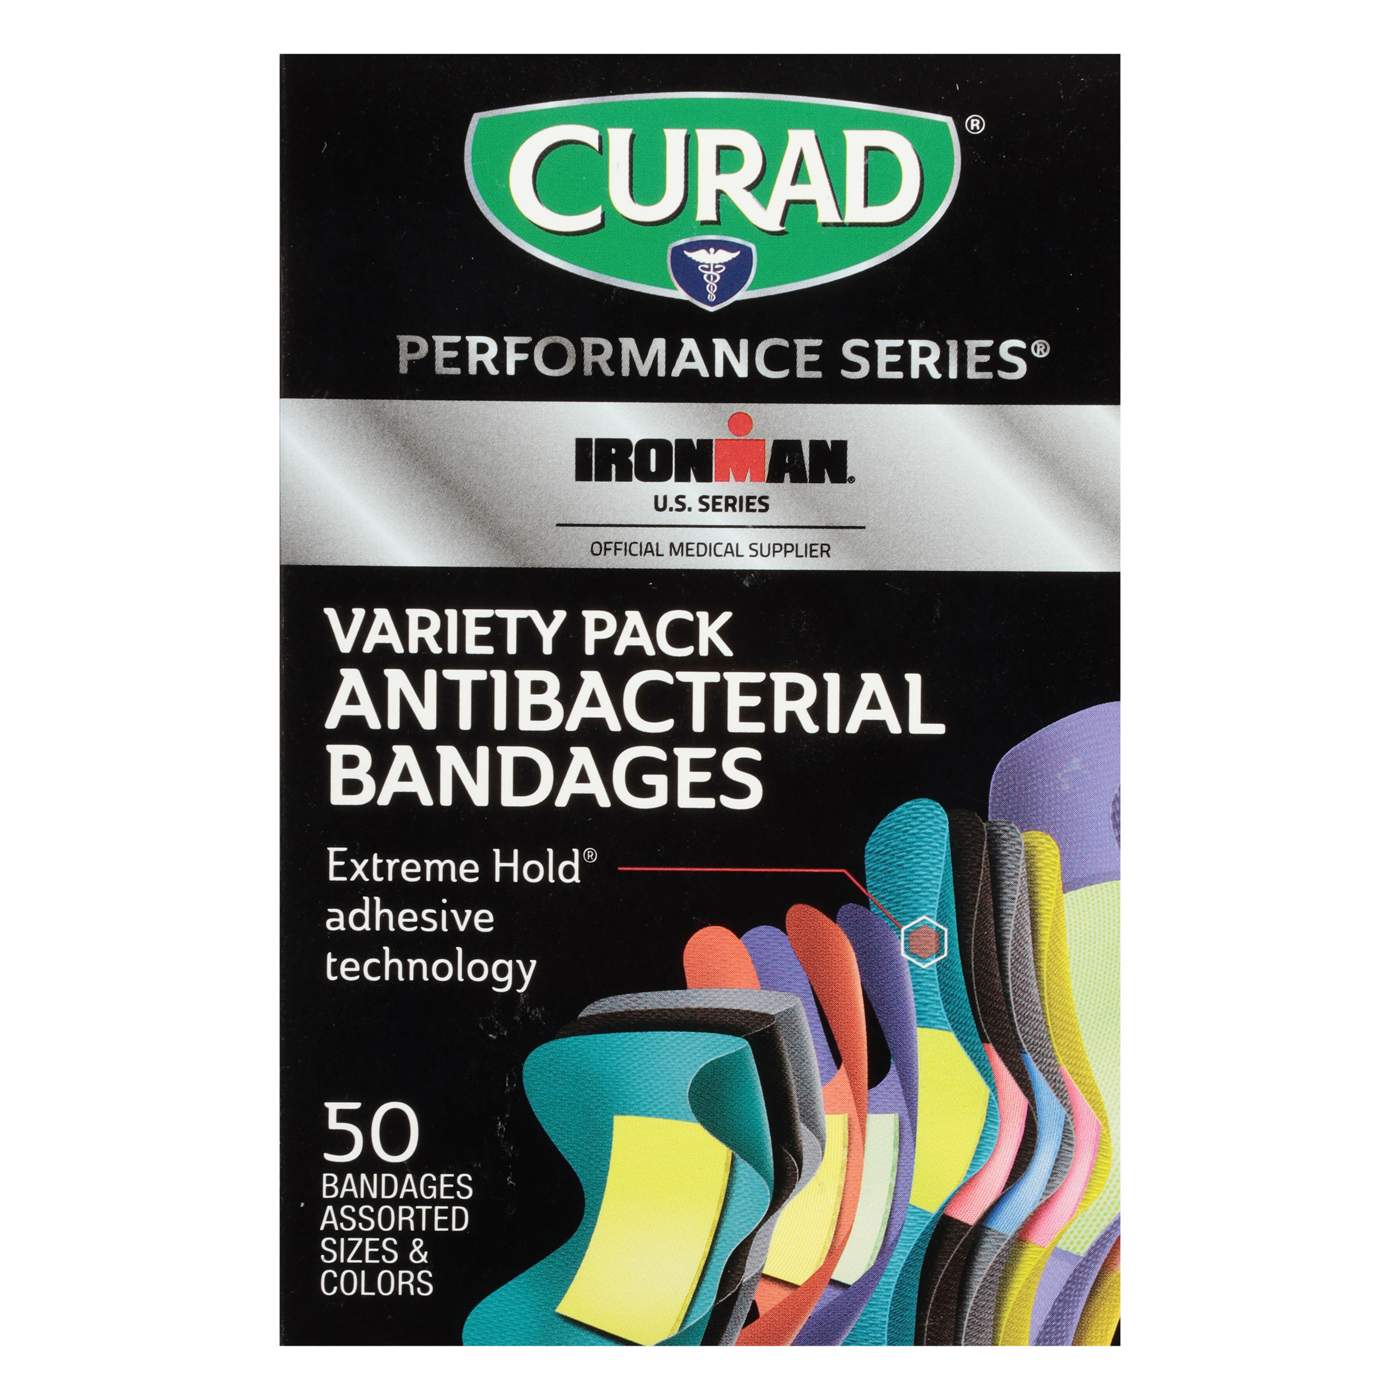 Curad Performance Series Fabric Variety Pack Antibacterial Bandages; image 1 of 2